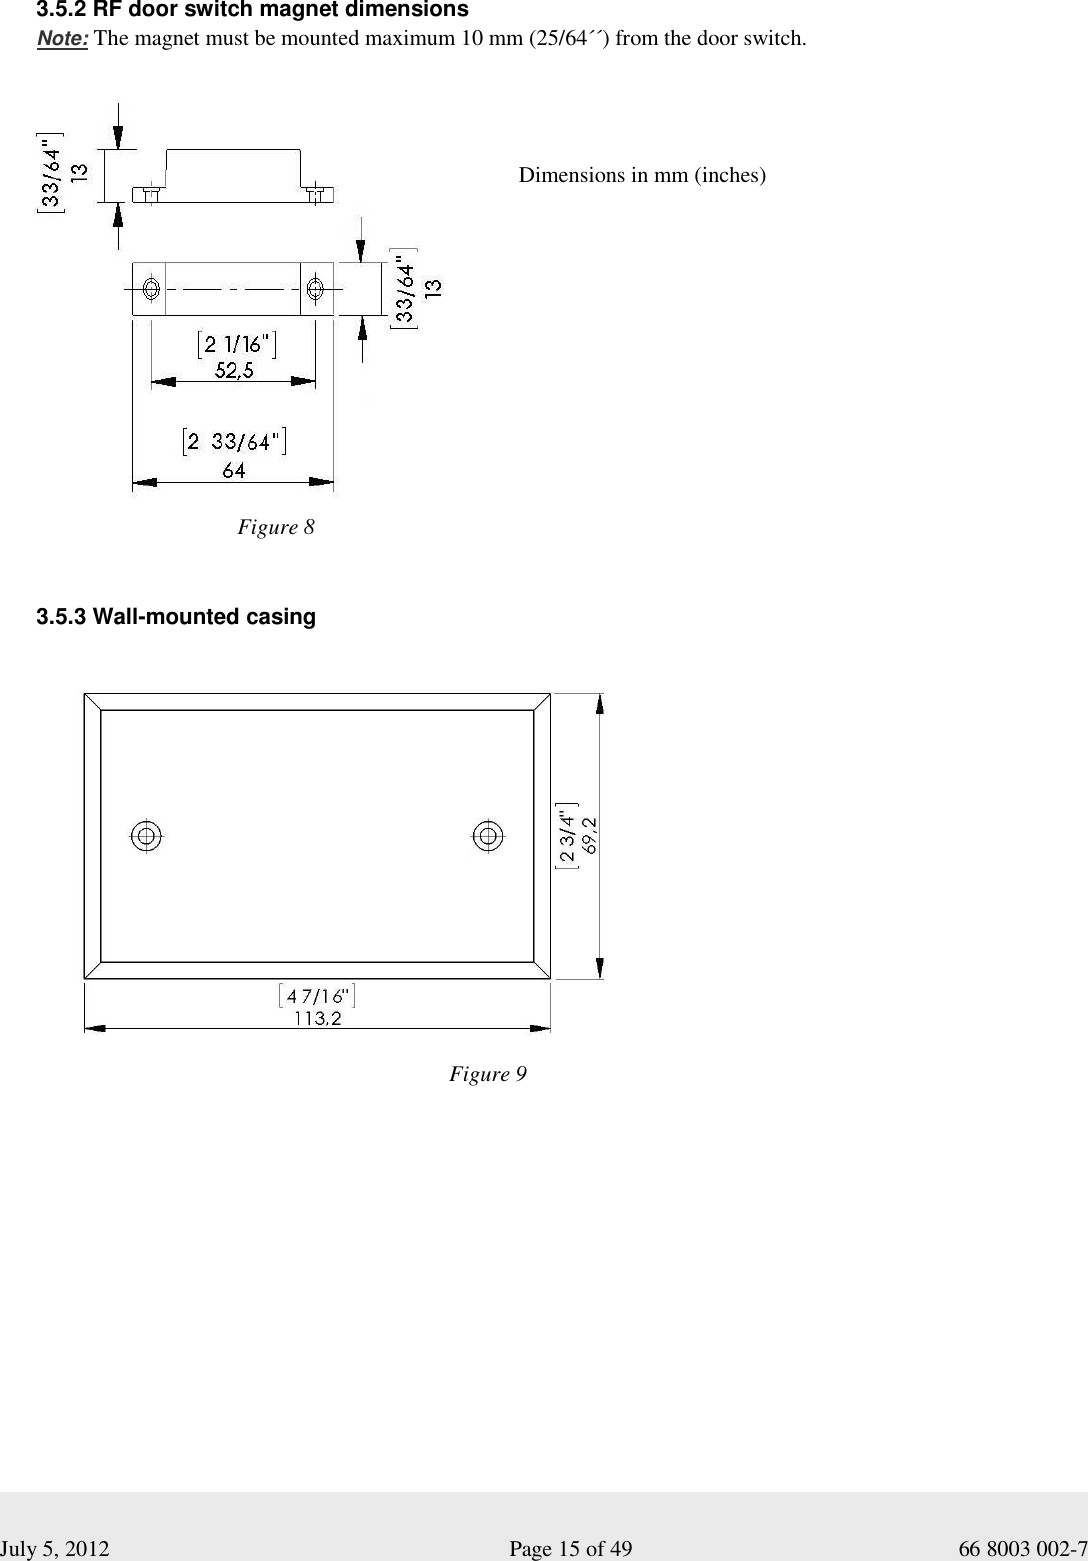  July 5, 2012                                                              Page 15 of 49                                           66 8003 002-7 3.5.2 RF door switch magnet dimensions Note: The magnet must be mounted maximum 10 mm (25/64´´) from the door switch.           3.5.3 Wall-mounted casingFigure 8 Dimensions in mm (inches) Figure 9 